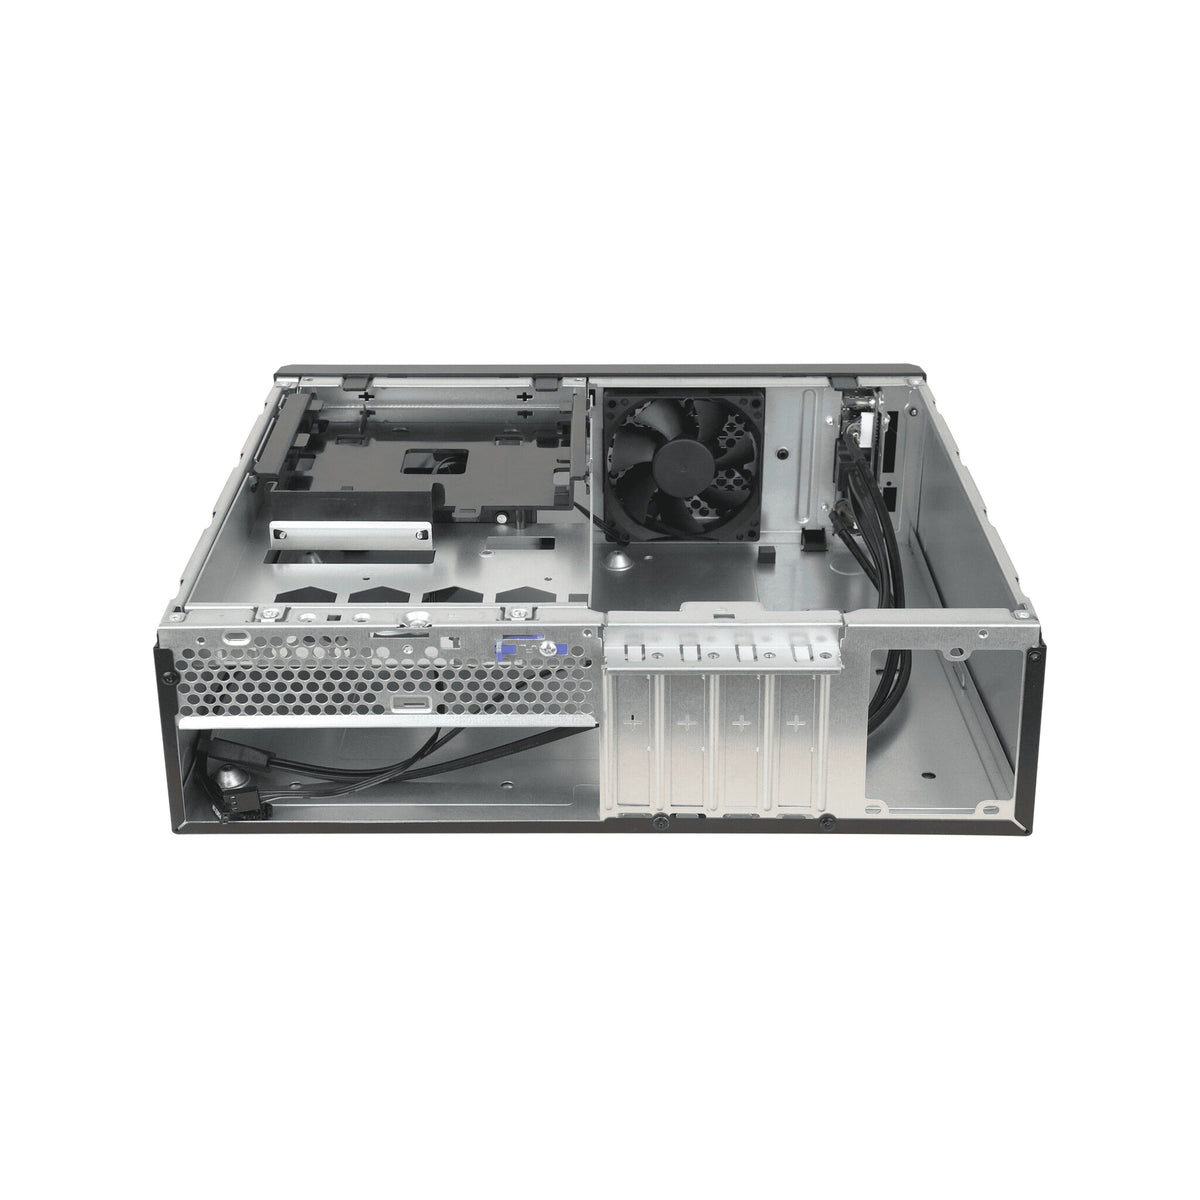 Chieftec BE-10B-300 Small Form Factor Case in Black